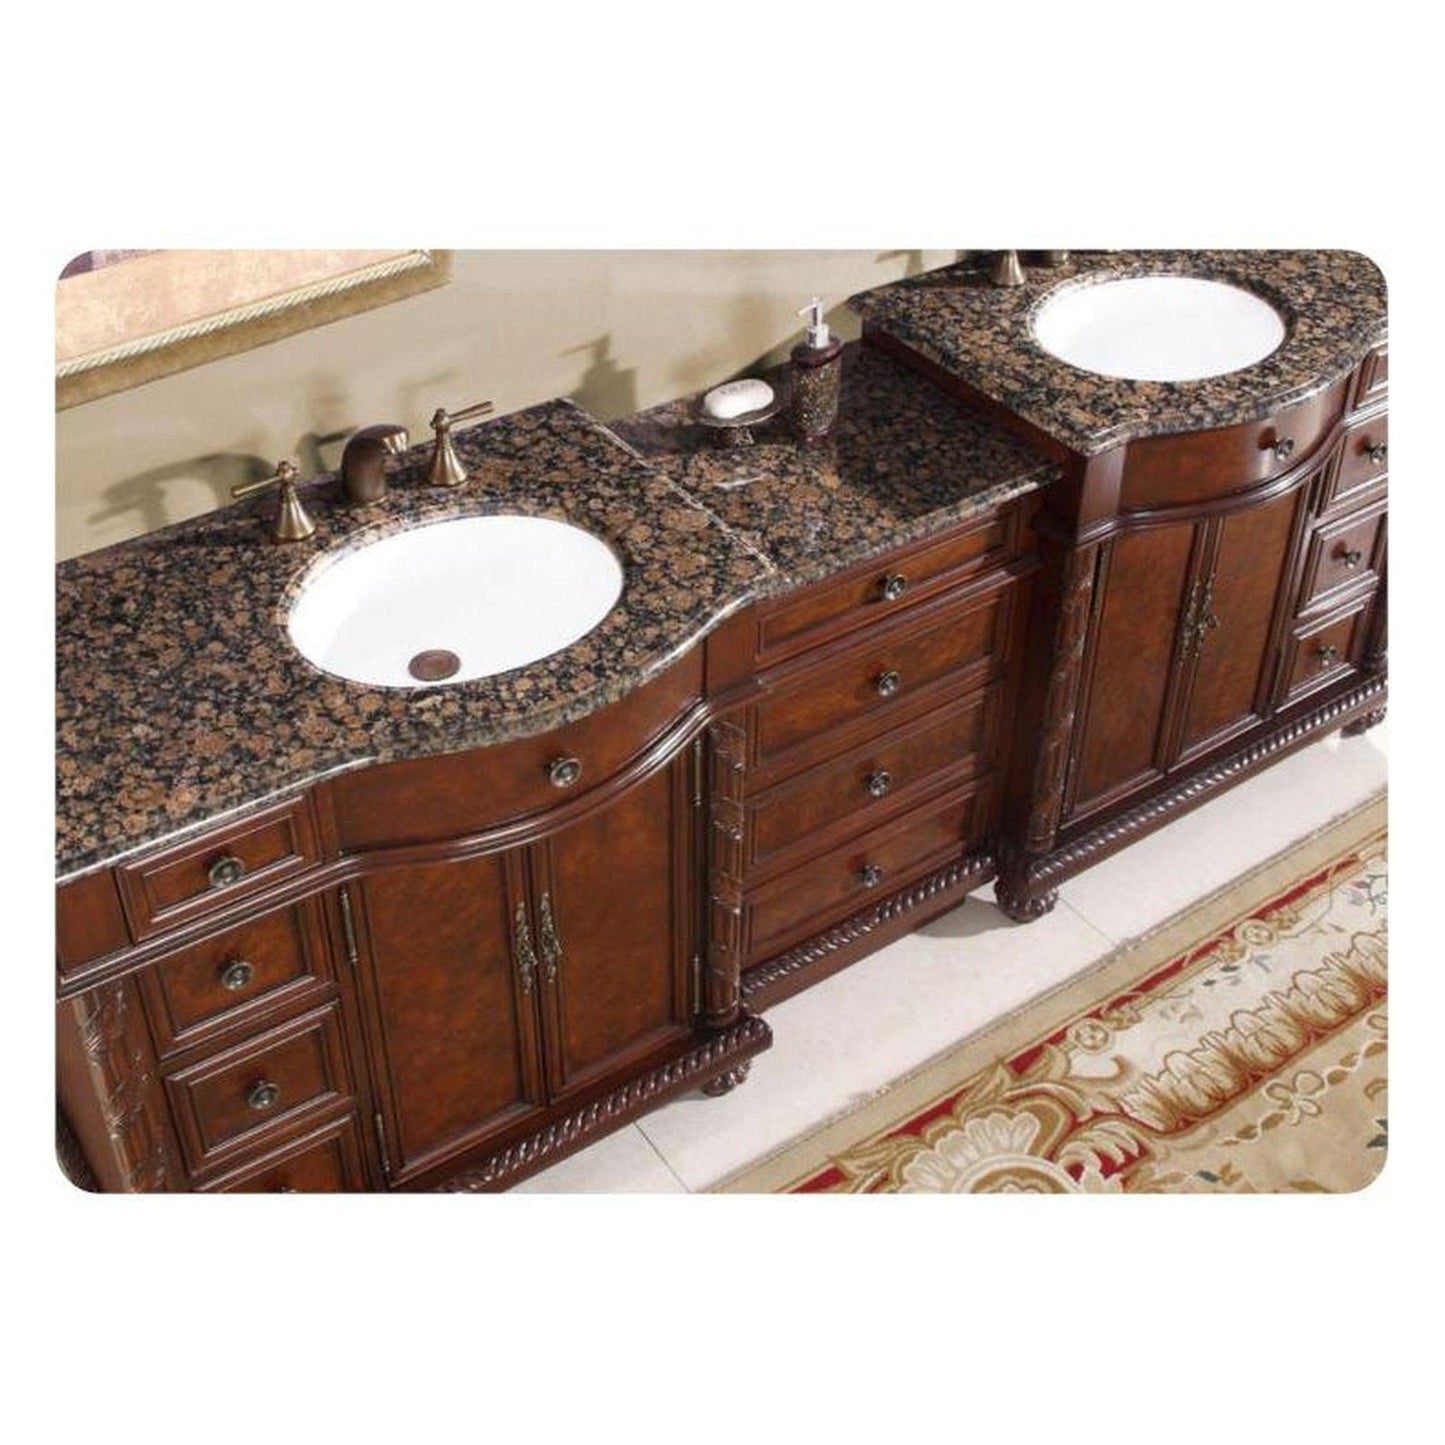 Silkroad Exclusive 90" Double Sink English Chestnut Modular Bathroom Vanity With Baltic Brown Granite Countertop, White Ceramic Undermount Sink and Drawer Bank Cabinet